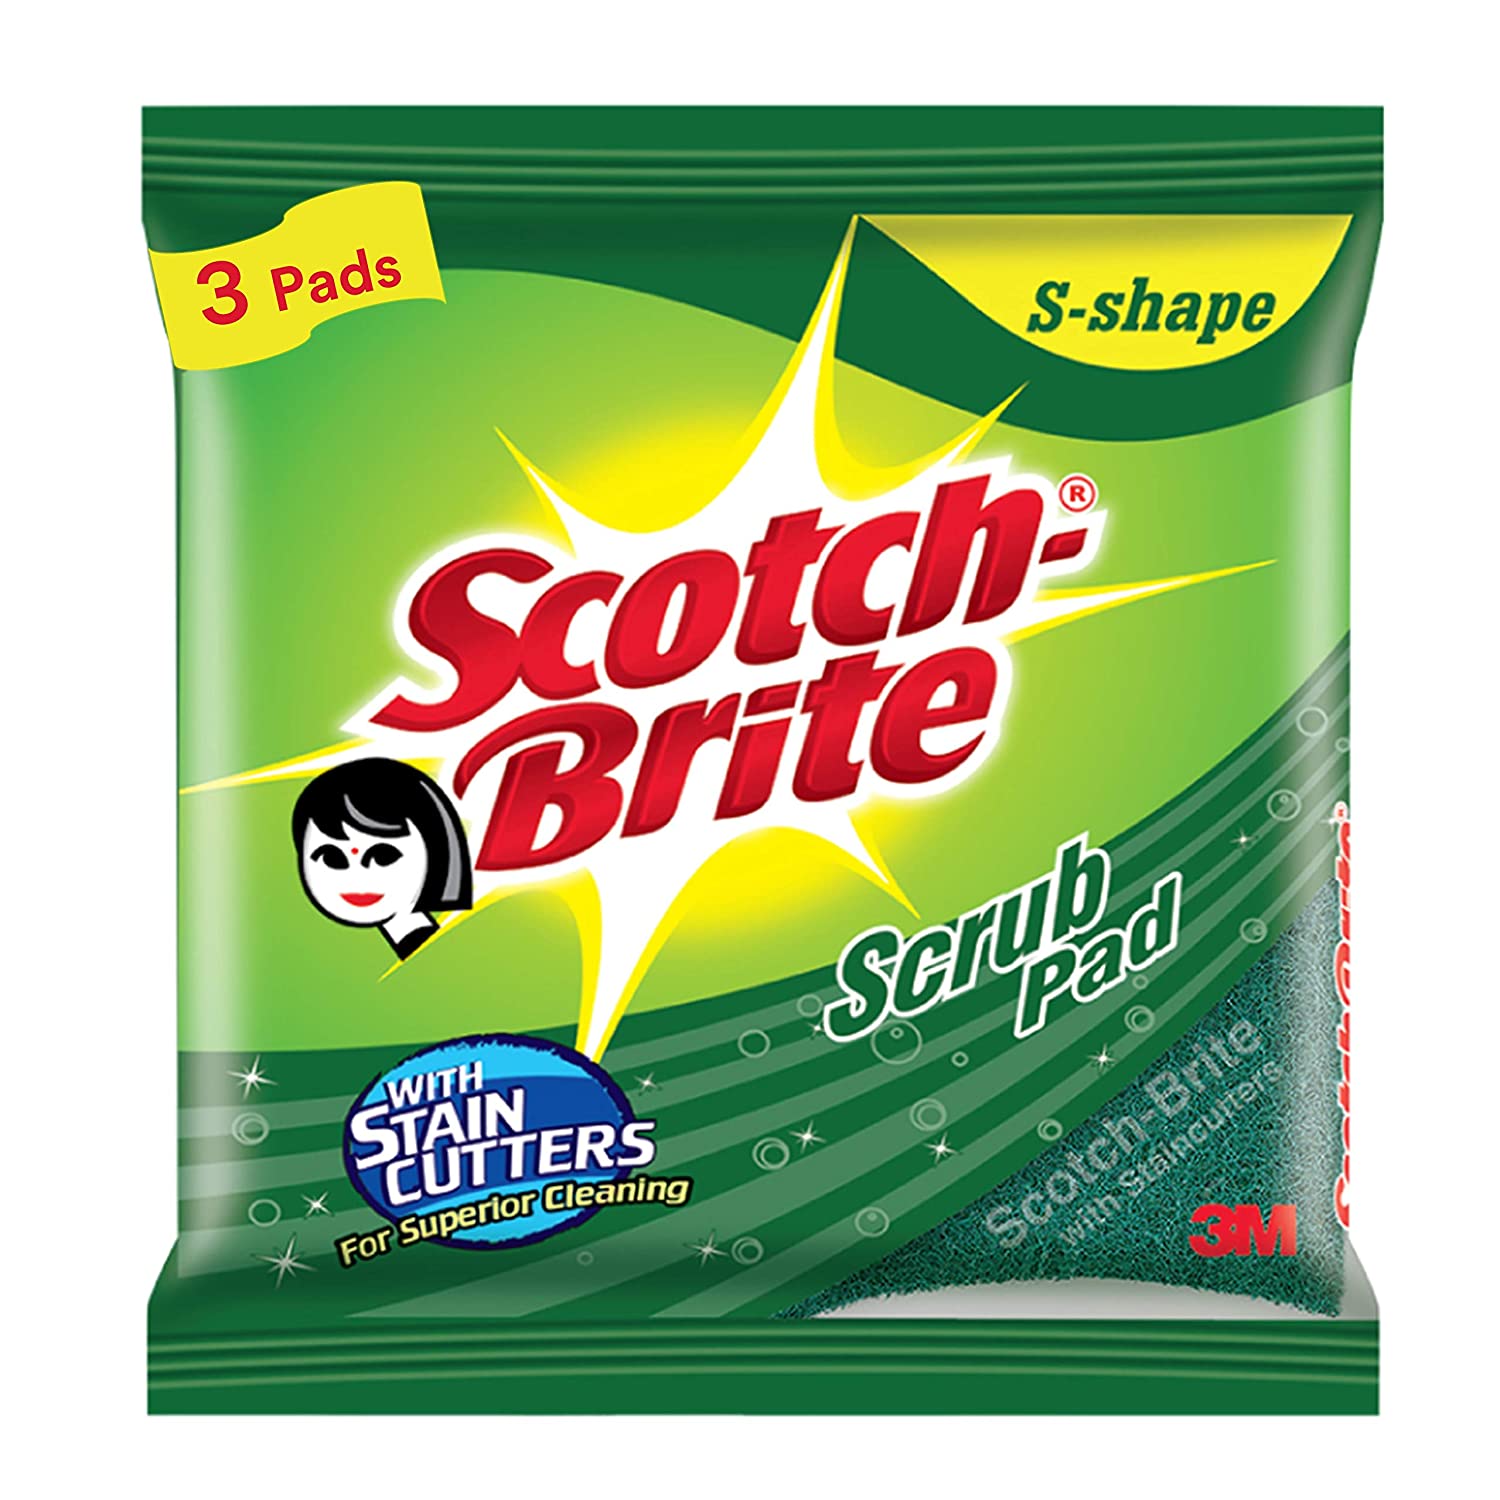 Scotch Brite Scrub Large 2+ Pack - 1 pcs avalaible for home